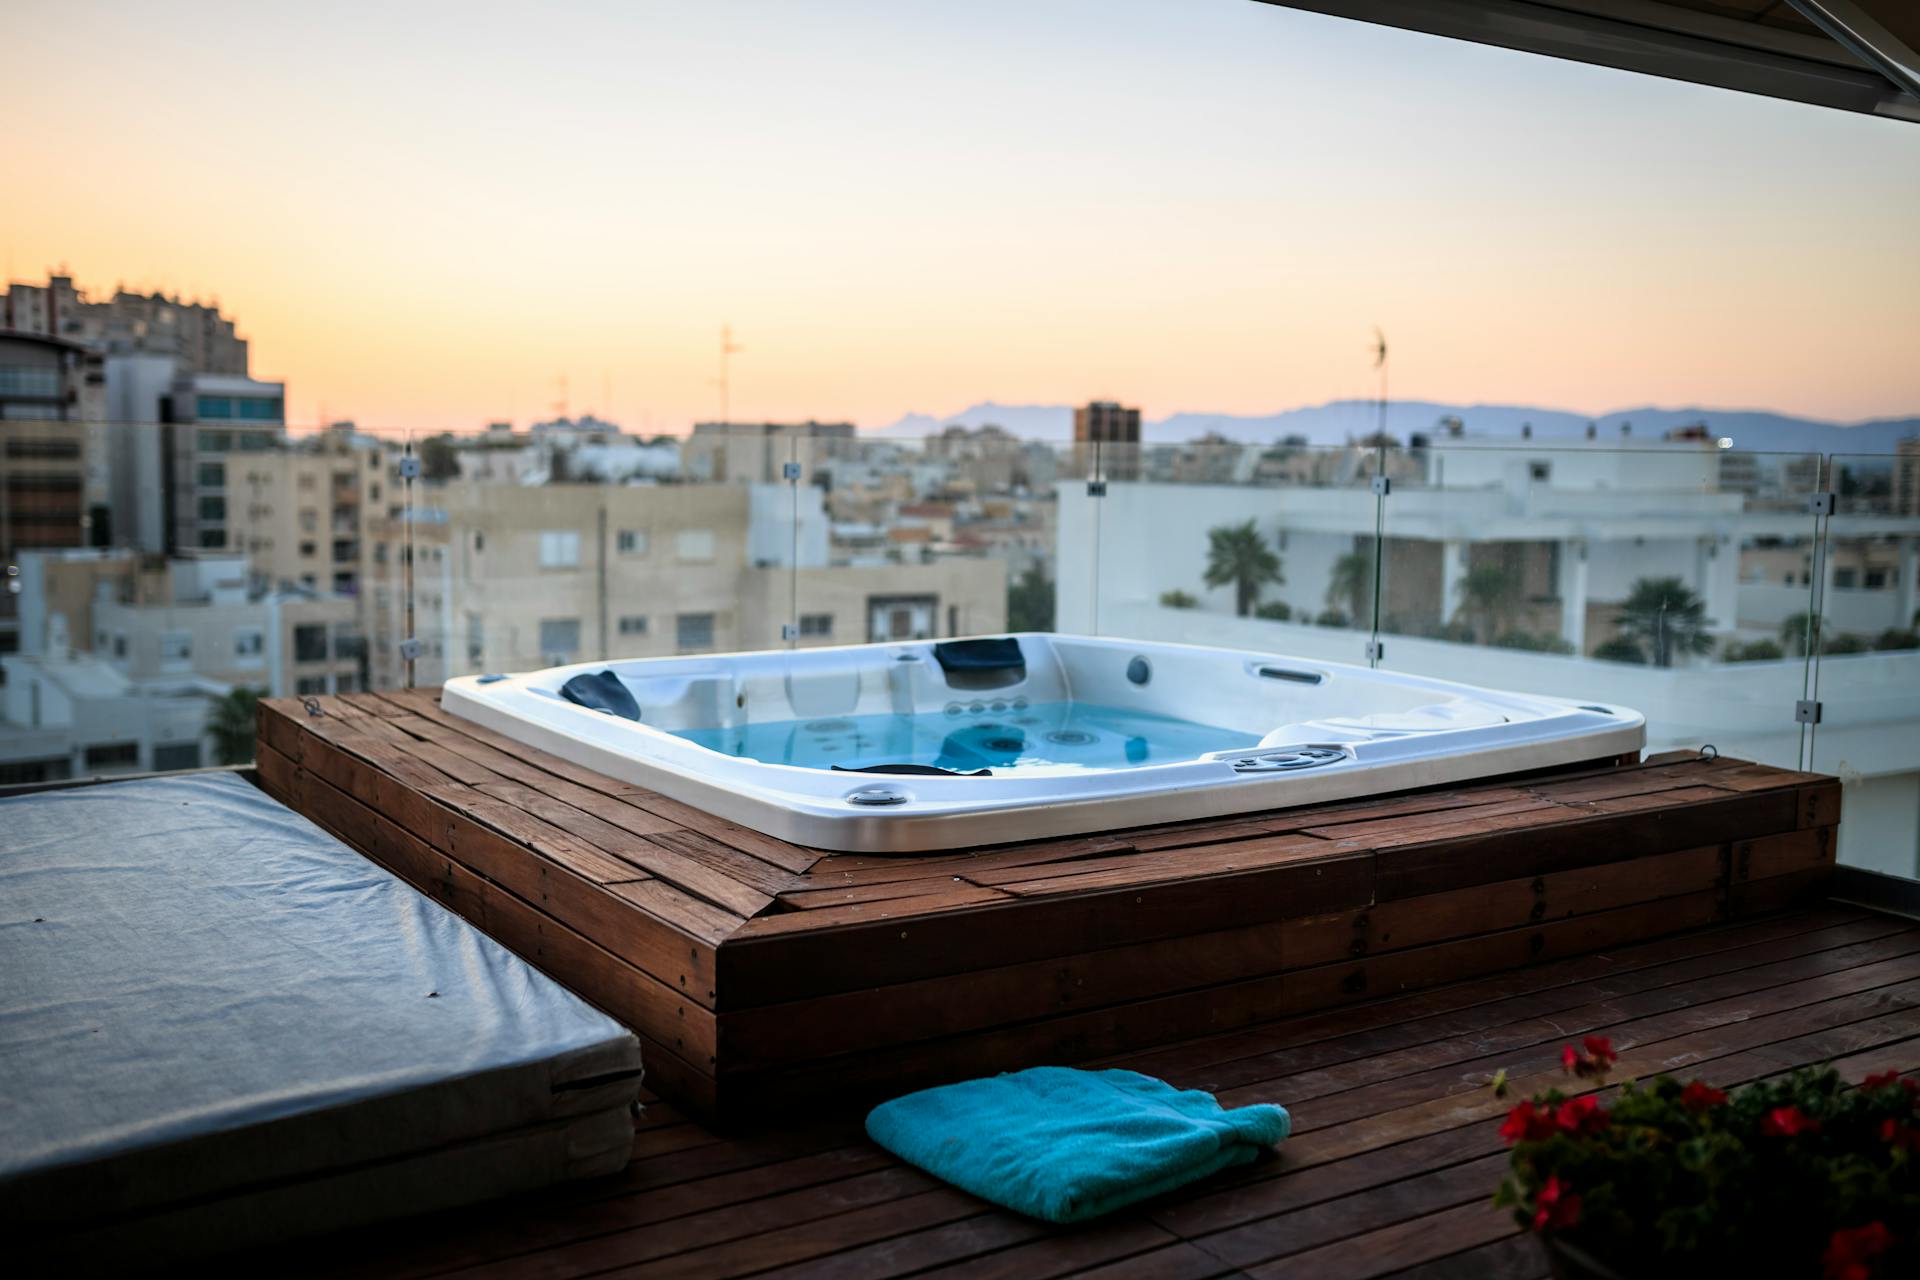 A jacuzzi installed in a balcony | Source: Pexels